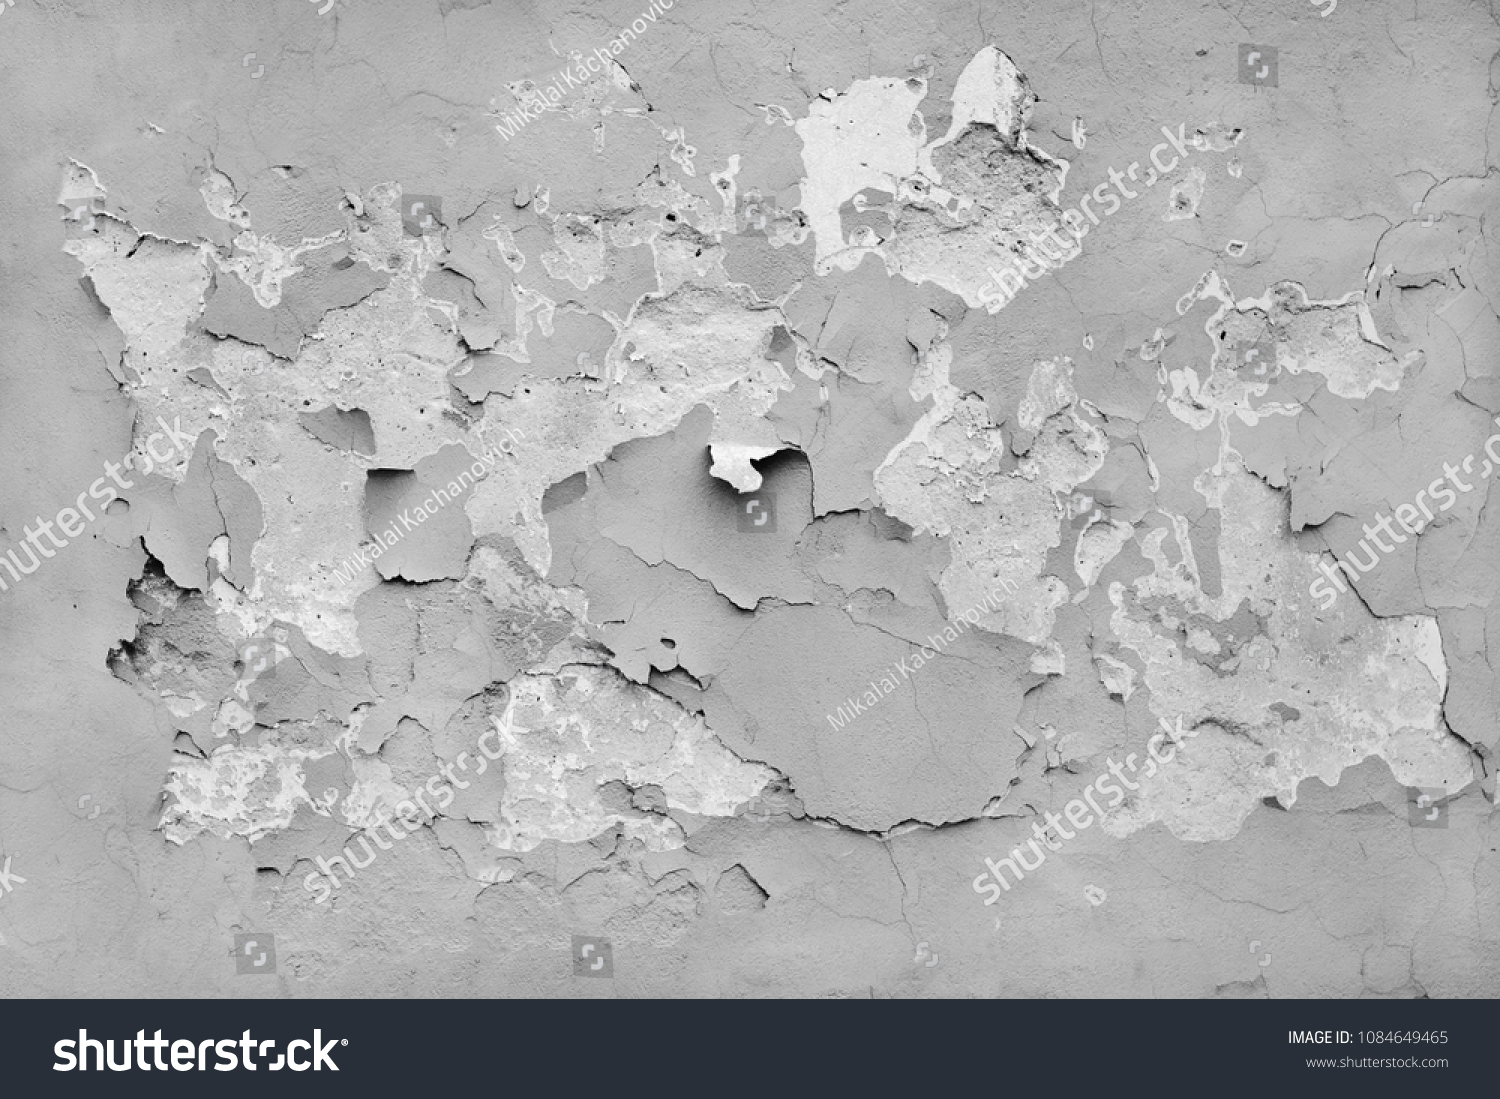 Flaking paint on an old concrete wall. Gray background. Texture. #1084649465